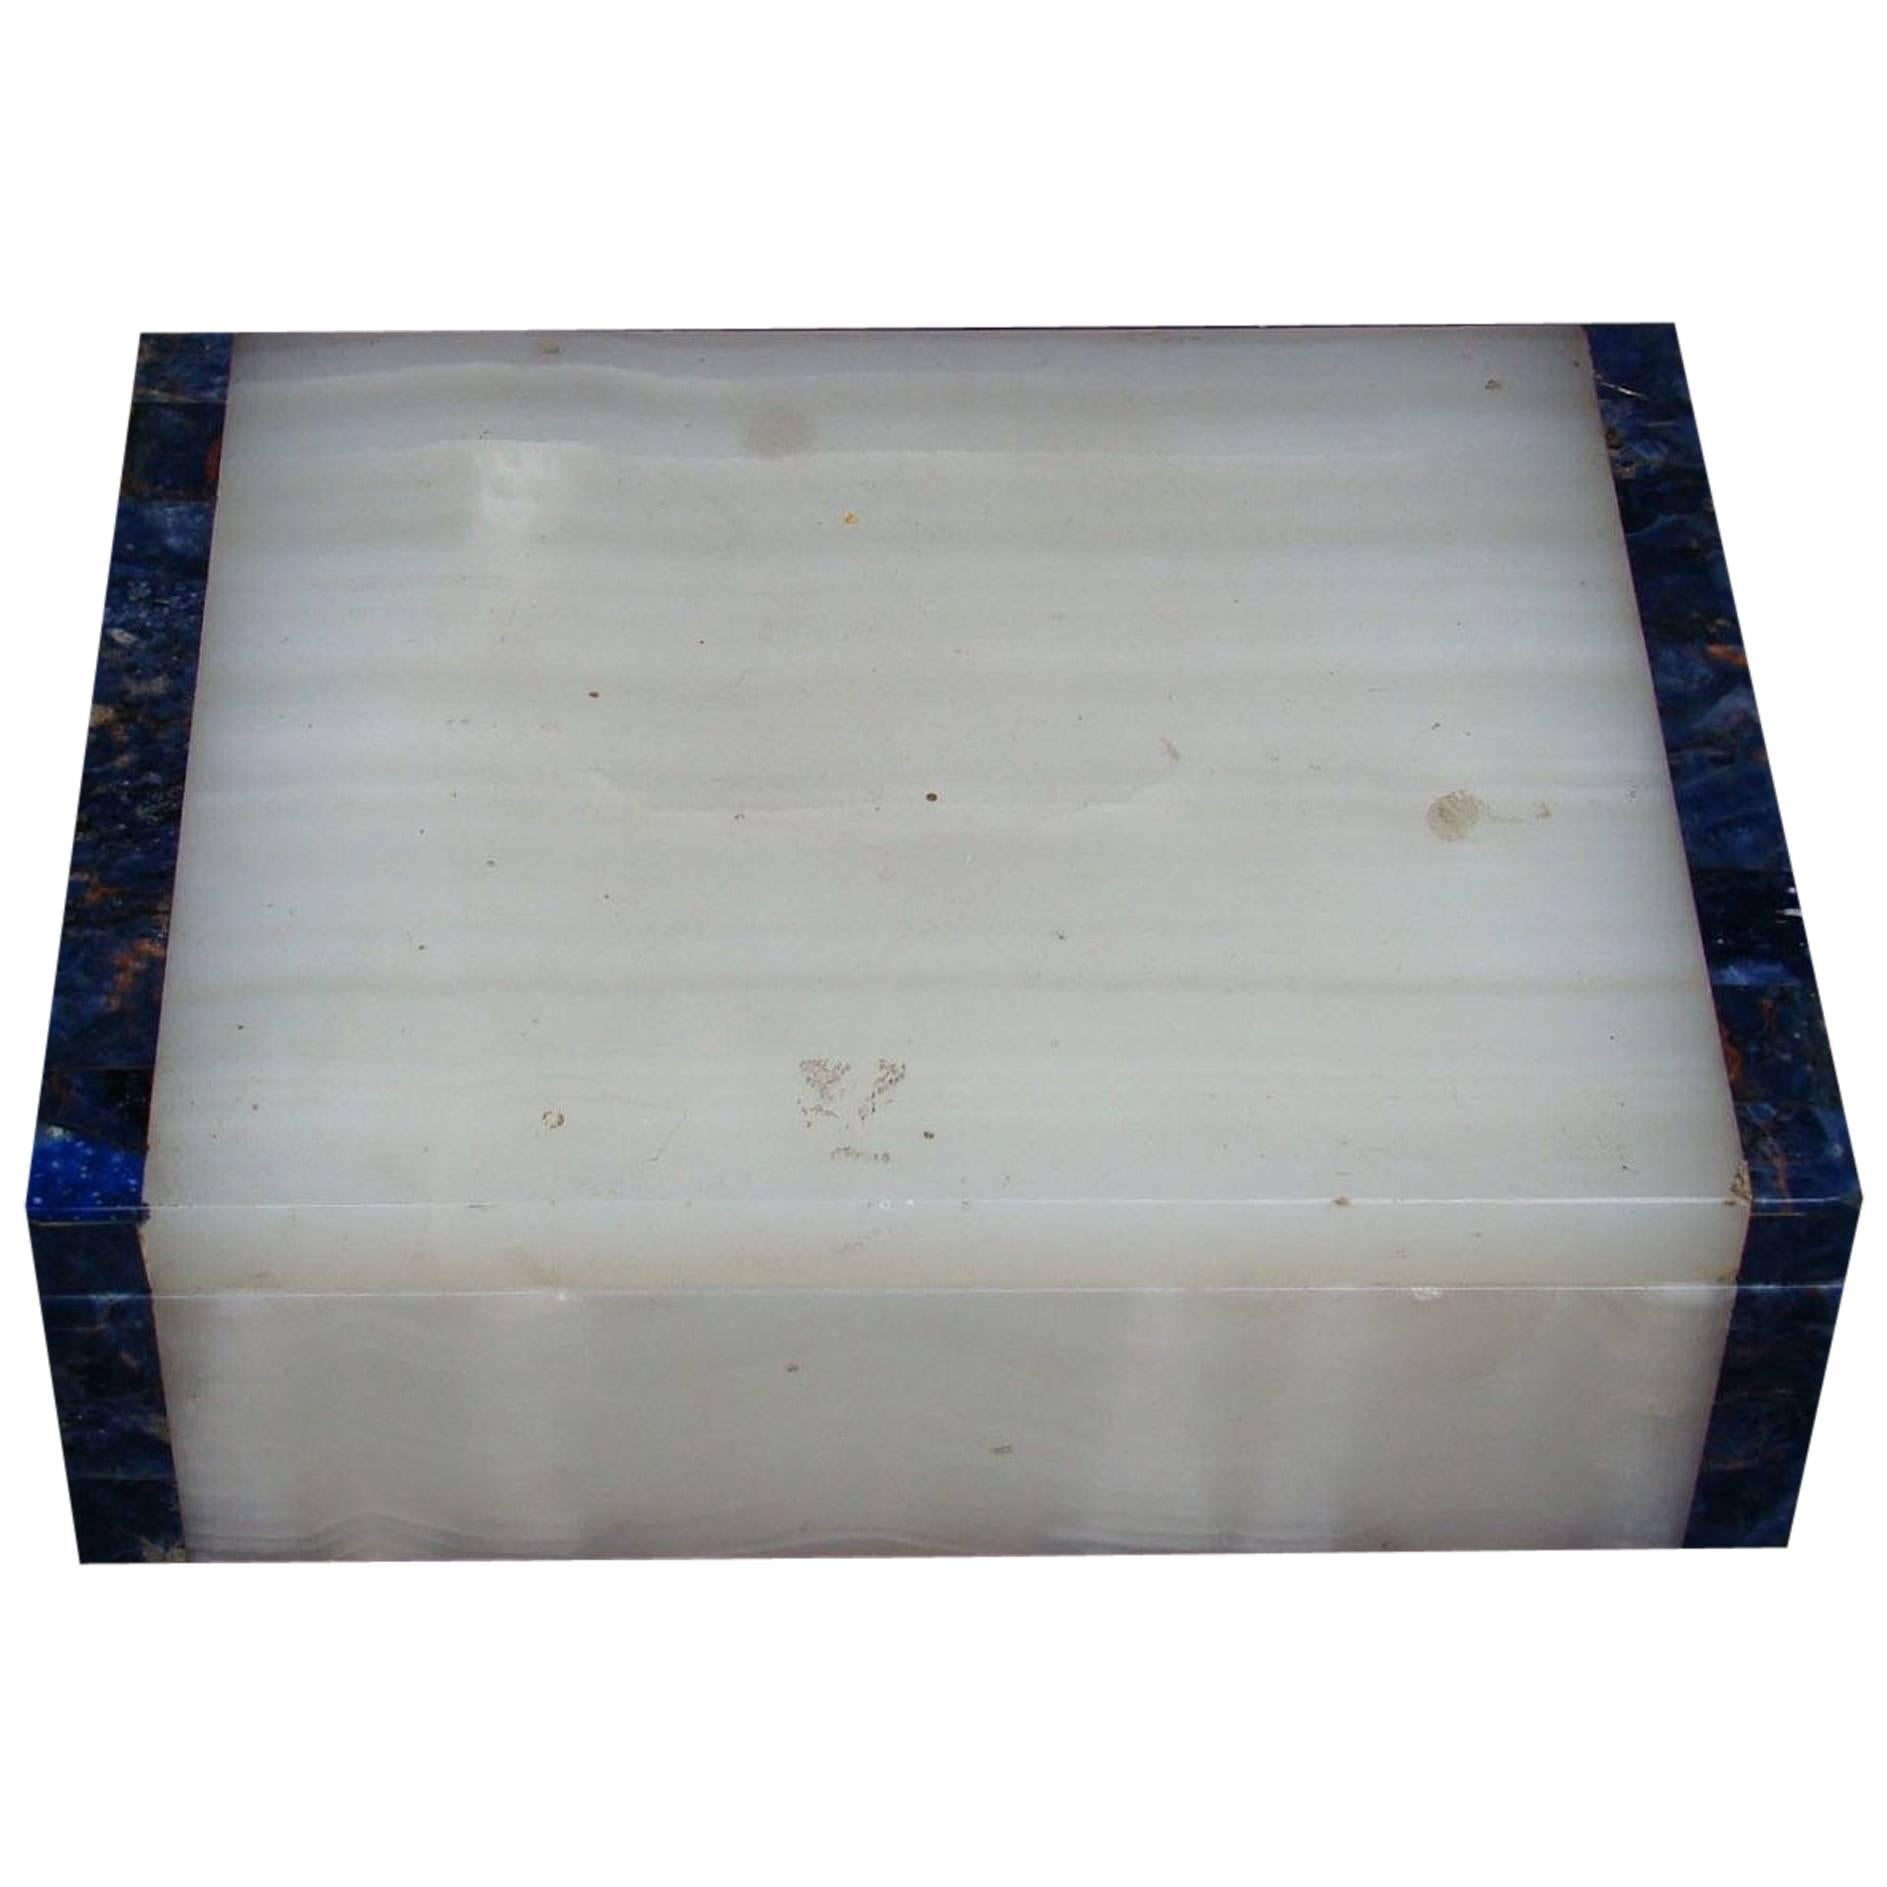 1940s Late Art Deco White Onyx and Lapis Lazuli Box by Henry Griffith & Sons For Sale